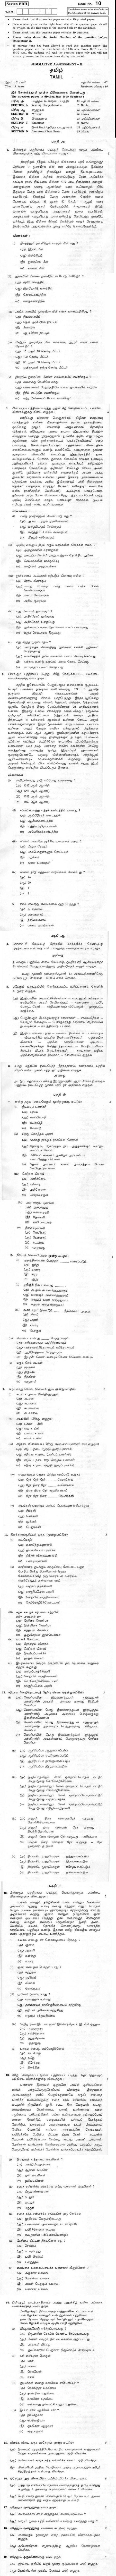 CBSE Class X Previous Year Question Papers 2012 Tamil